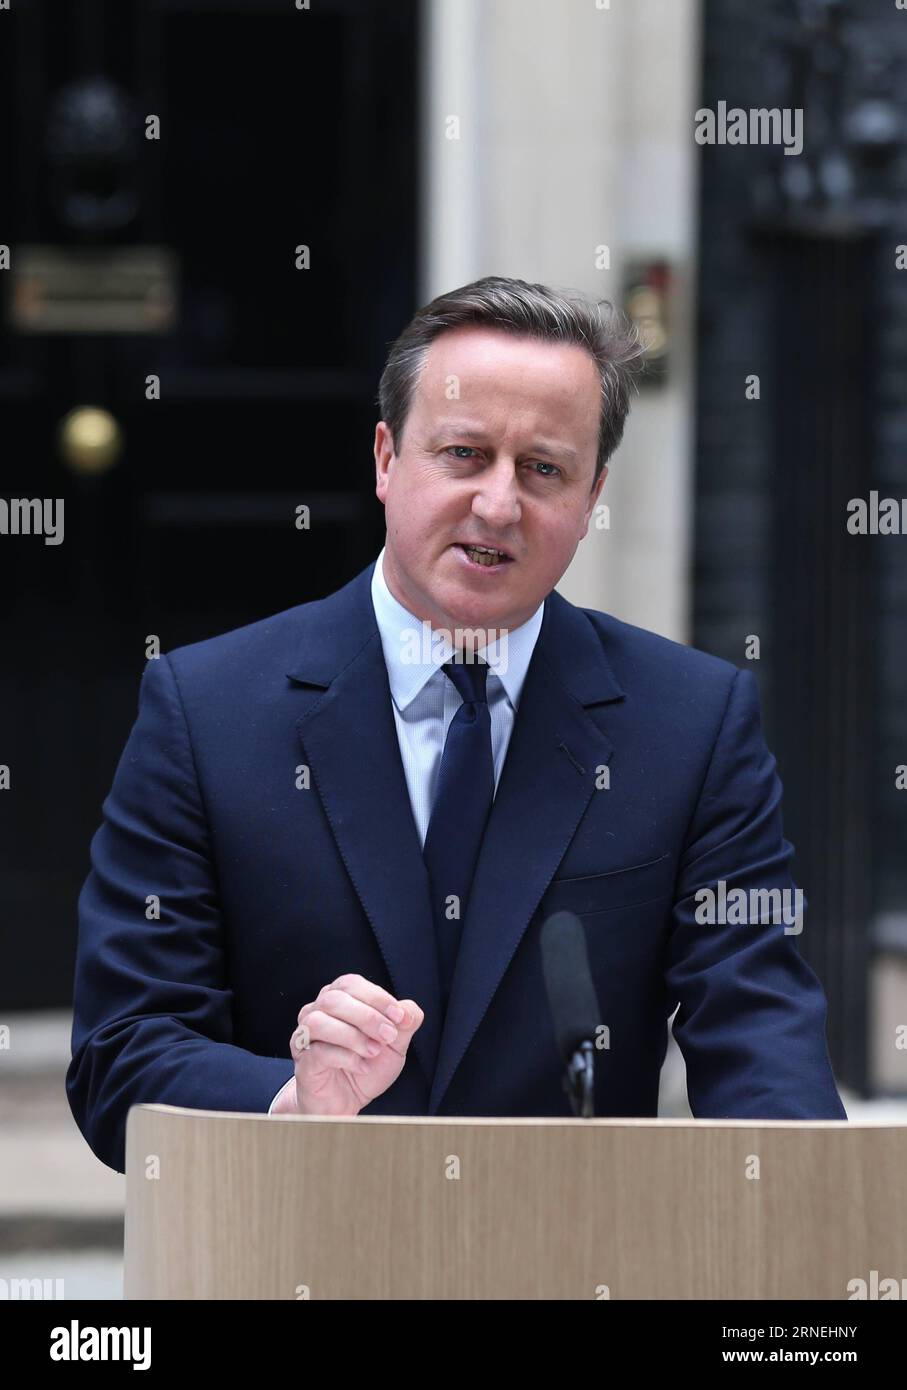 (160624) -- LONDON, June 24, 2016 -- File photo taken on June 21, 2016 shows British Prime Minister David Cameron delivering a speech at 10 Downing Street in London. British Prime Minister David Cameron announced his resignation on Friday. ) BRITAIN-LONDON-CAMERON-RESIGNATION-FILE HanxYan PUBLICATIONxNOTxINxCHN   160624 London June 24 2016 File Photo Taken ON June 21 2016 Shows British Prime Ministers David Cameron Delivering a Speech AT 10 Downing Street in London British Prime Ministers David Cameron announced His Resignation ON Friday Britain London Cameron Resignation File HanxYan PUBLICAT Stock Photo